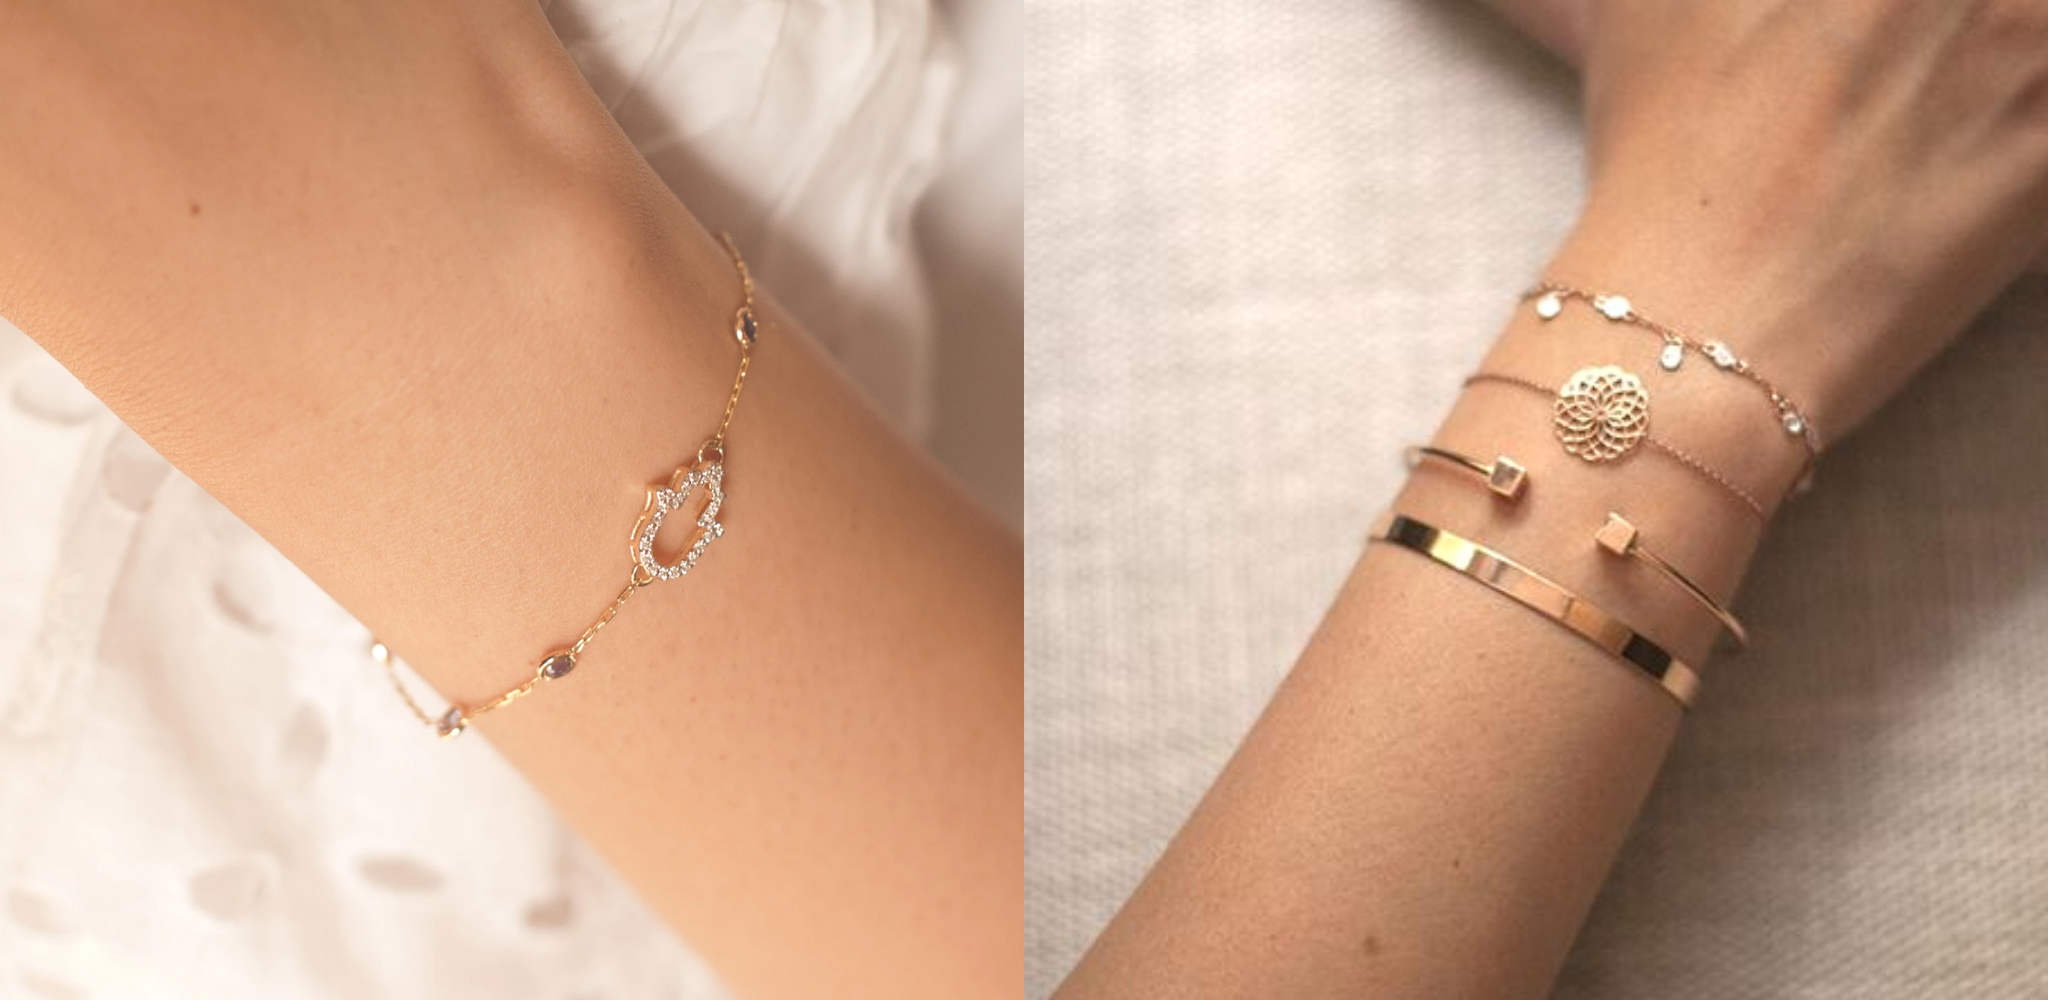 Do you too love wearing jewellery?? I do! | Delicate bracelet, Aesthetic  grunge outfit, Mehndi designs